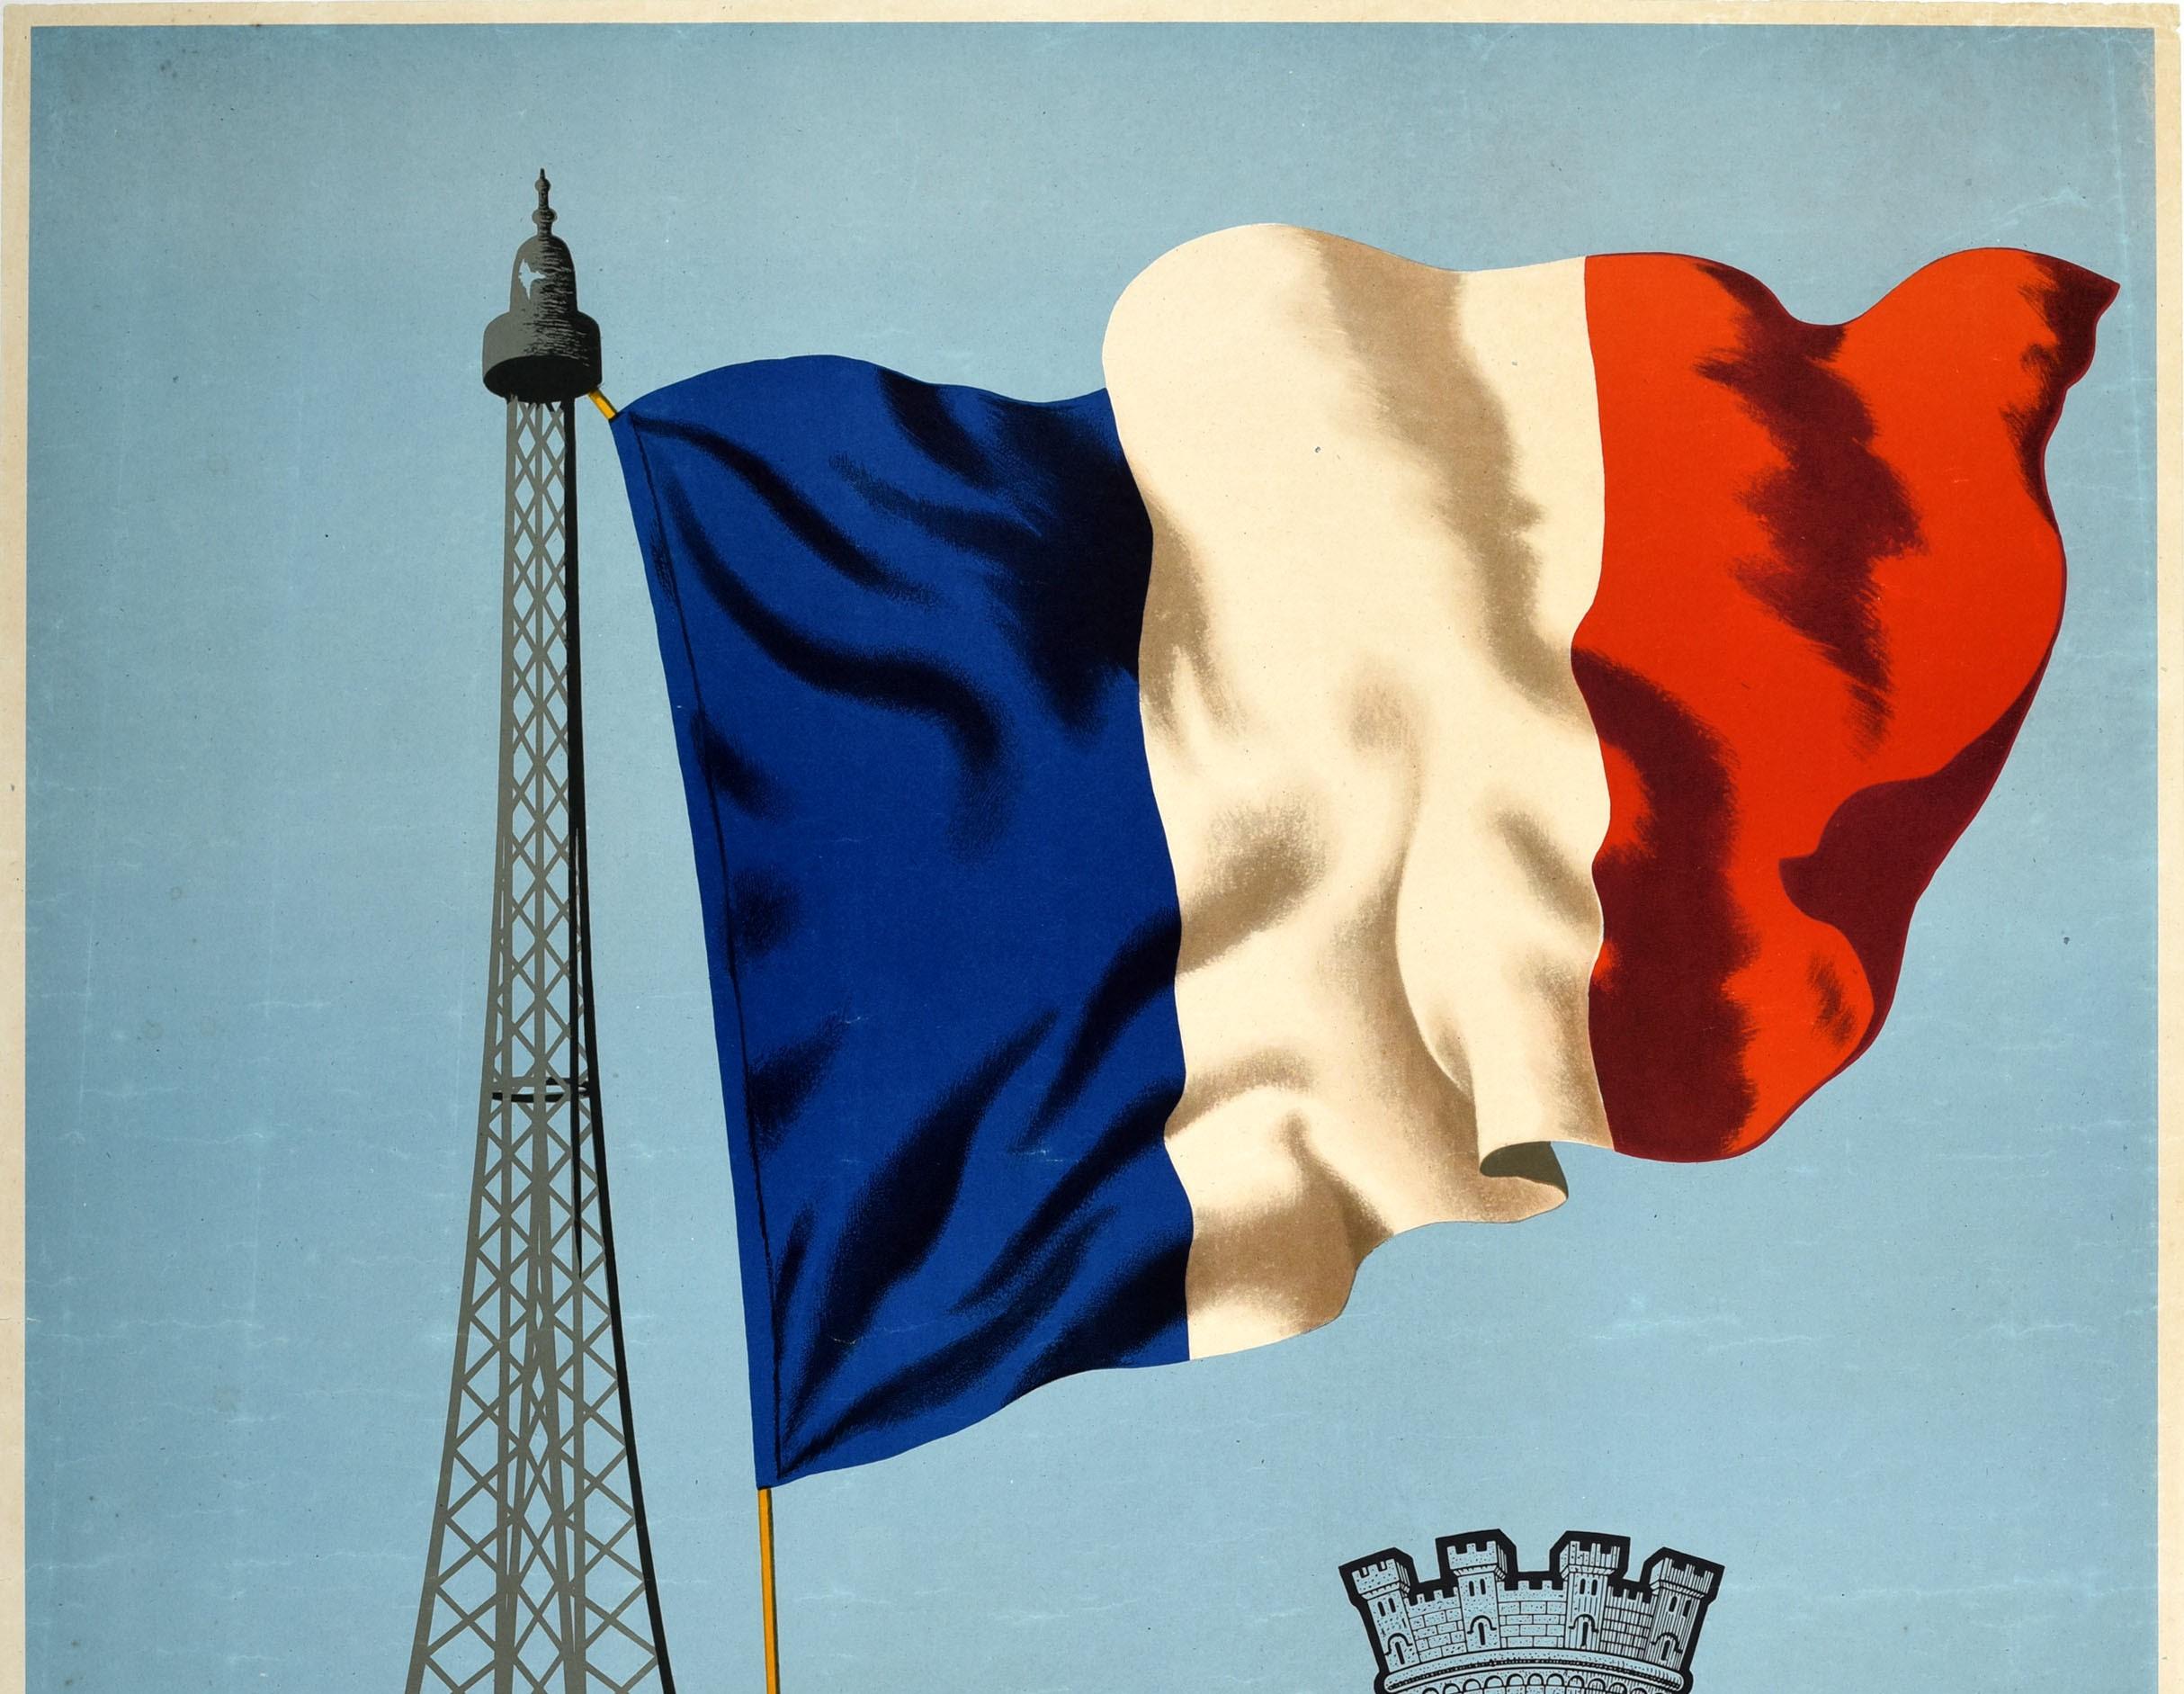 Original Vintage WWII Poster Liberated Paris She Does Not Sink Eiffel Tower Flag - Print by Unknown